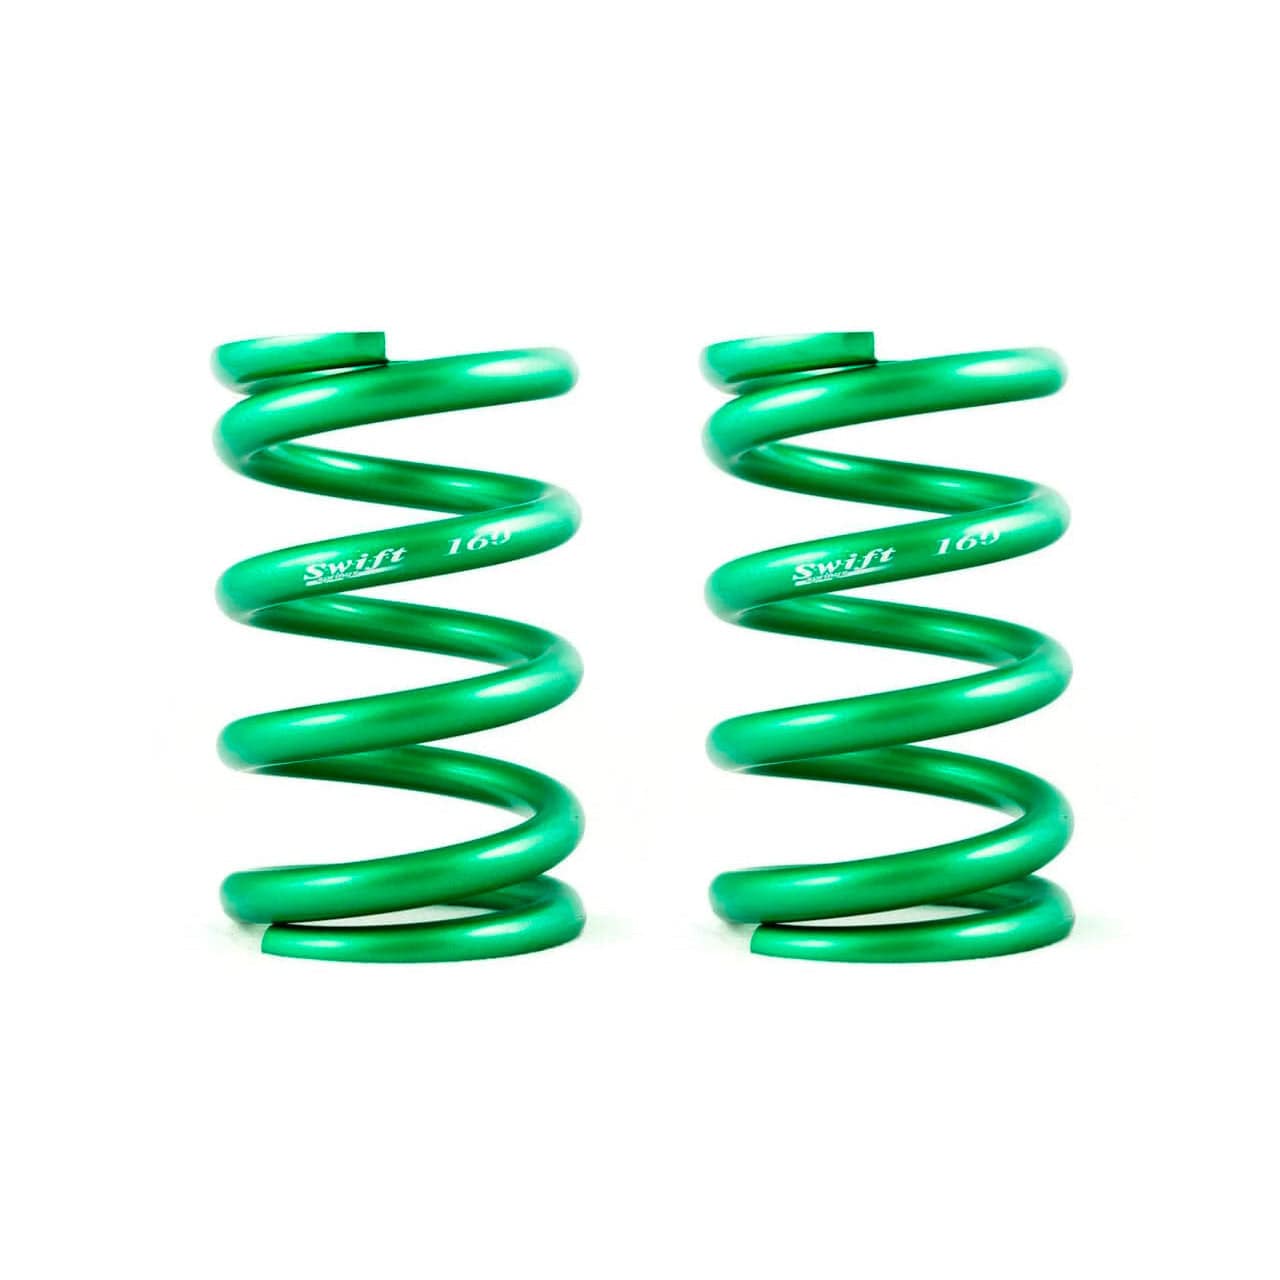 Swift Springs Metric Coilover Springs - ID 70mm, 8" Length